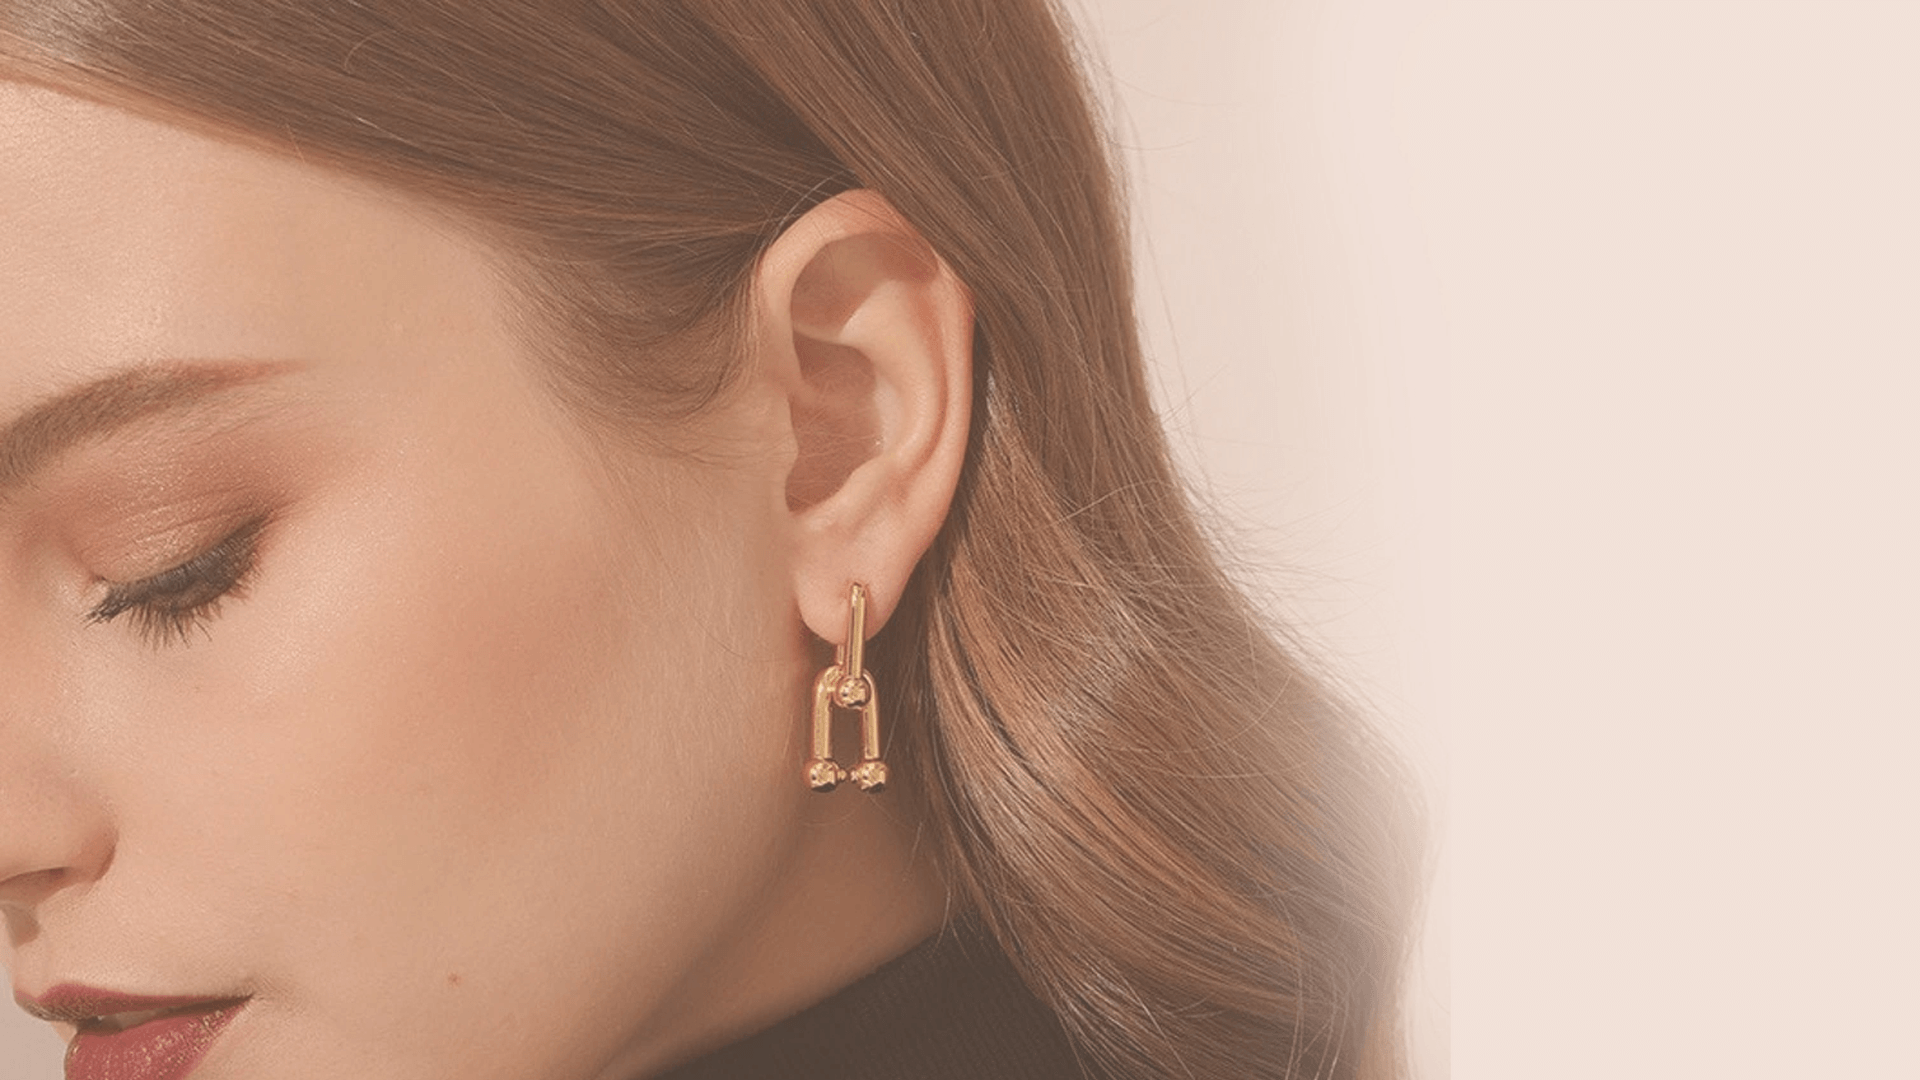 Accessorize with CHICOLINK Fashion Jewellery Earrings